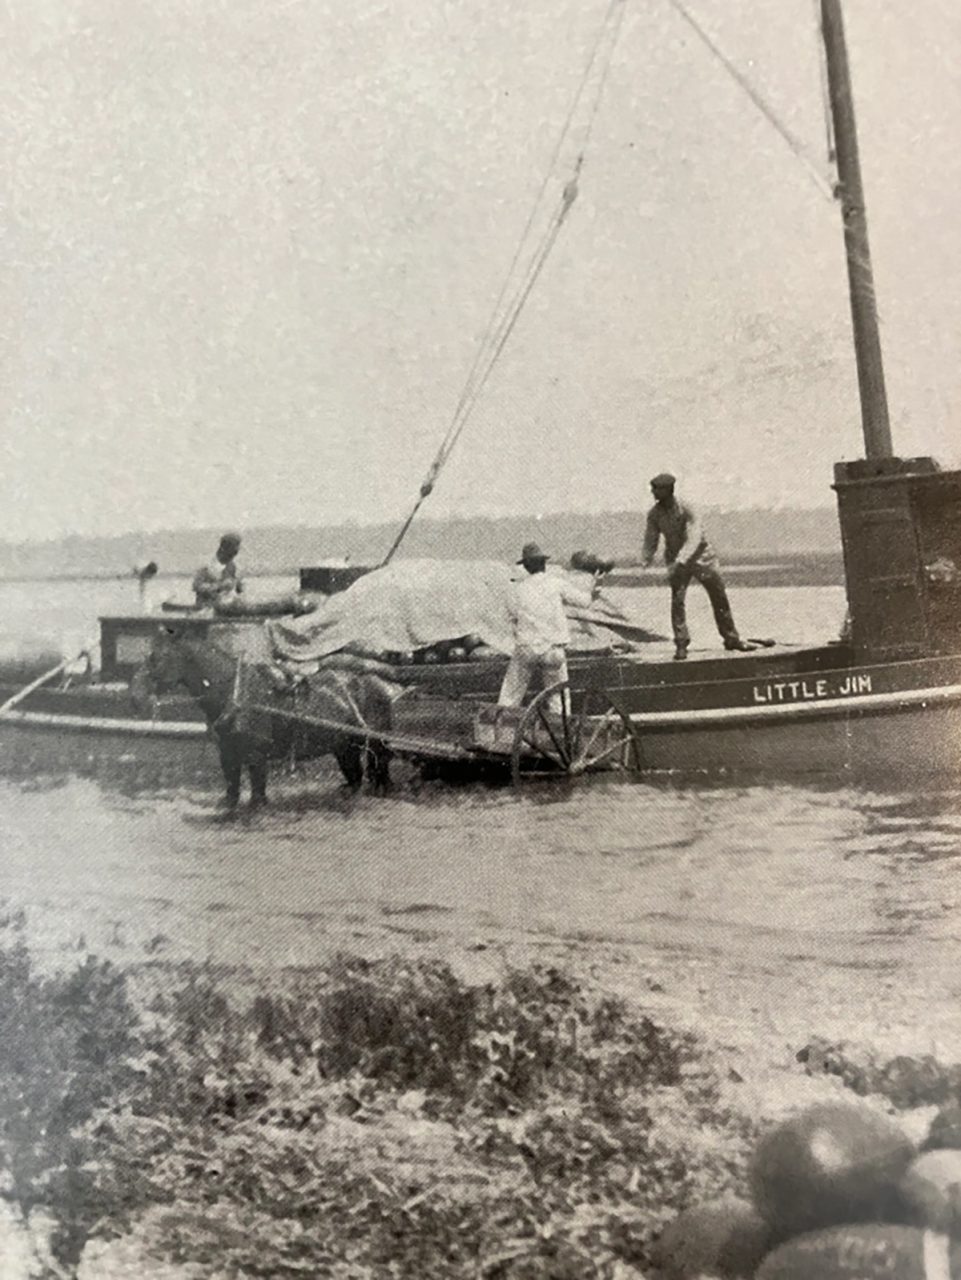 The freight boat Little Jim on Bogue Sound, 1907. Photo courtesy of the State Archives of North Carolina